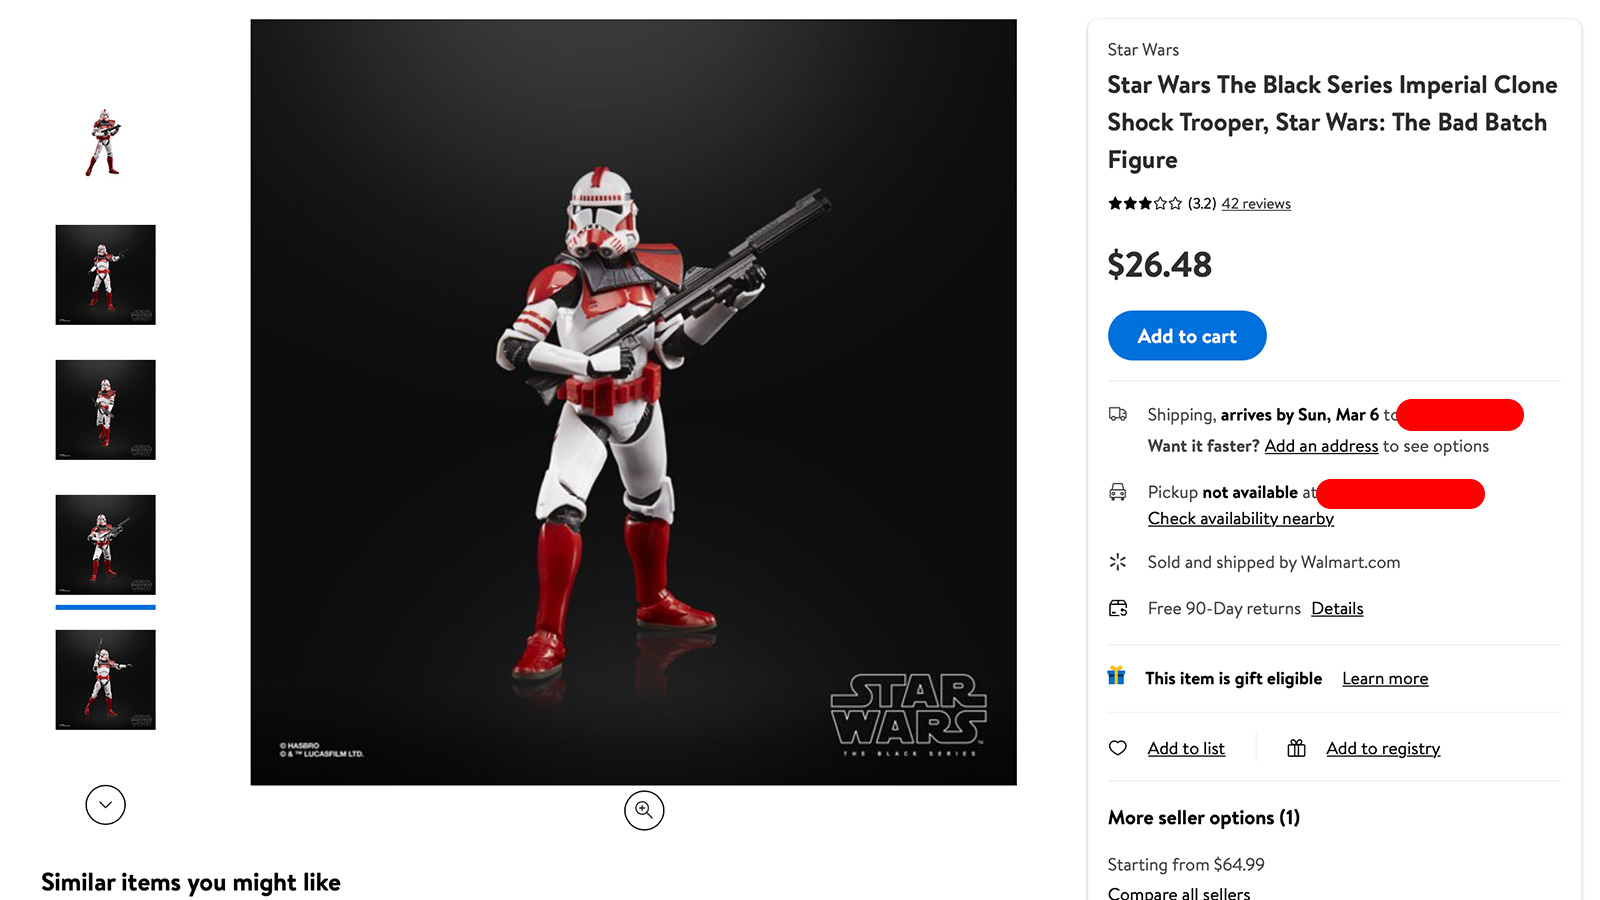 Once Again In Stock At Walmart.com - Exclusive The Black Series 6-Inch Imperial Clone Shock Trooper